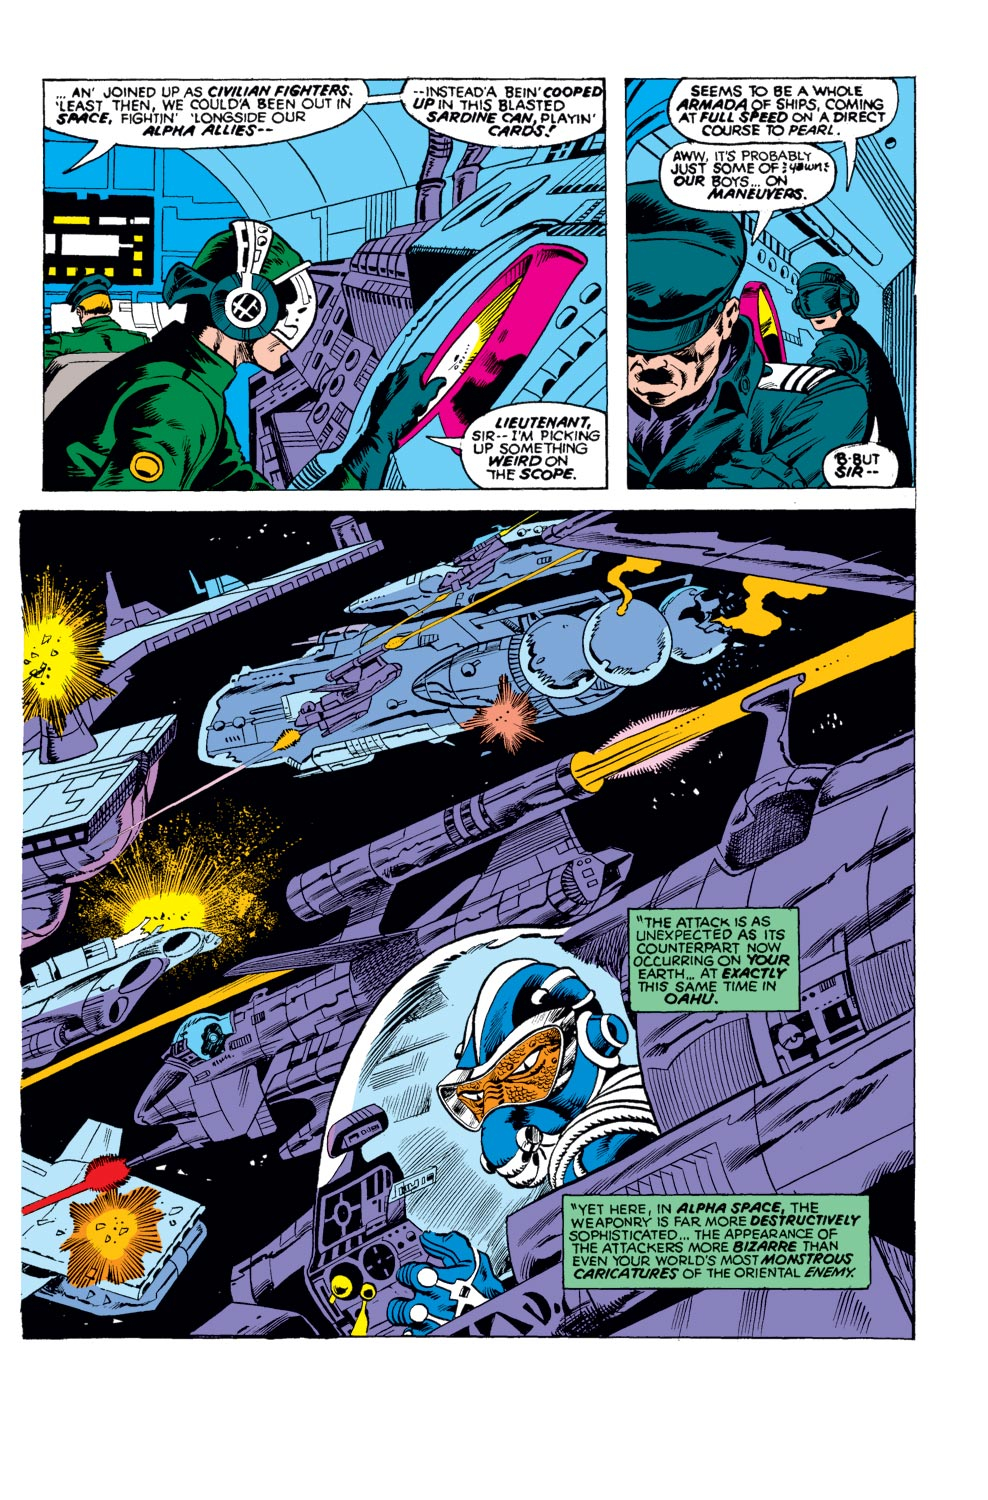 What If? (1977) issue 14 - Sgt. Fury had Fought WWII in Outer Space - Page 4